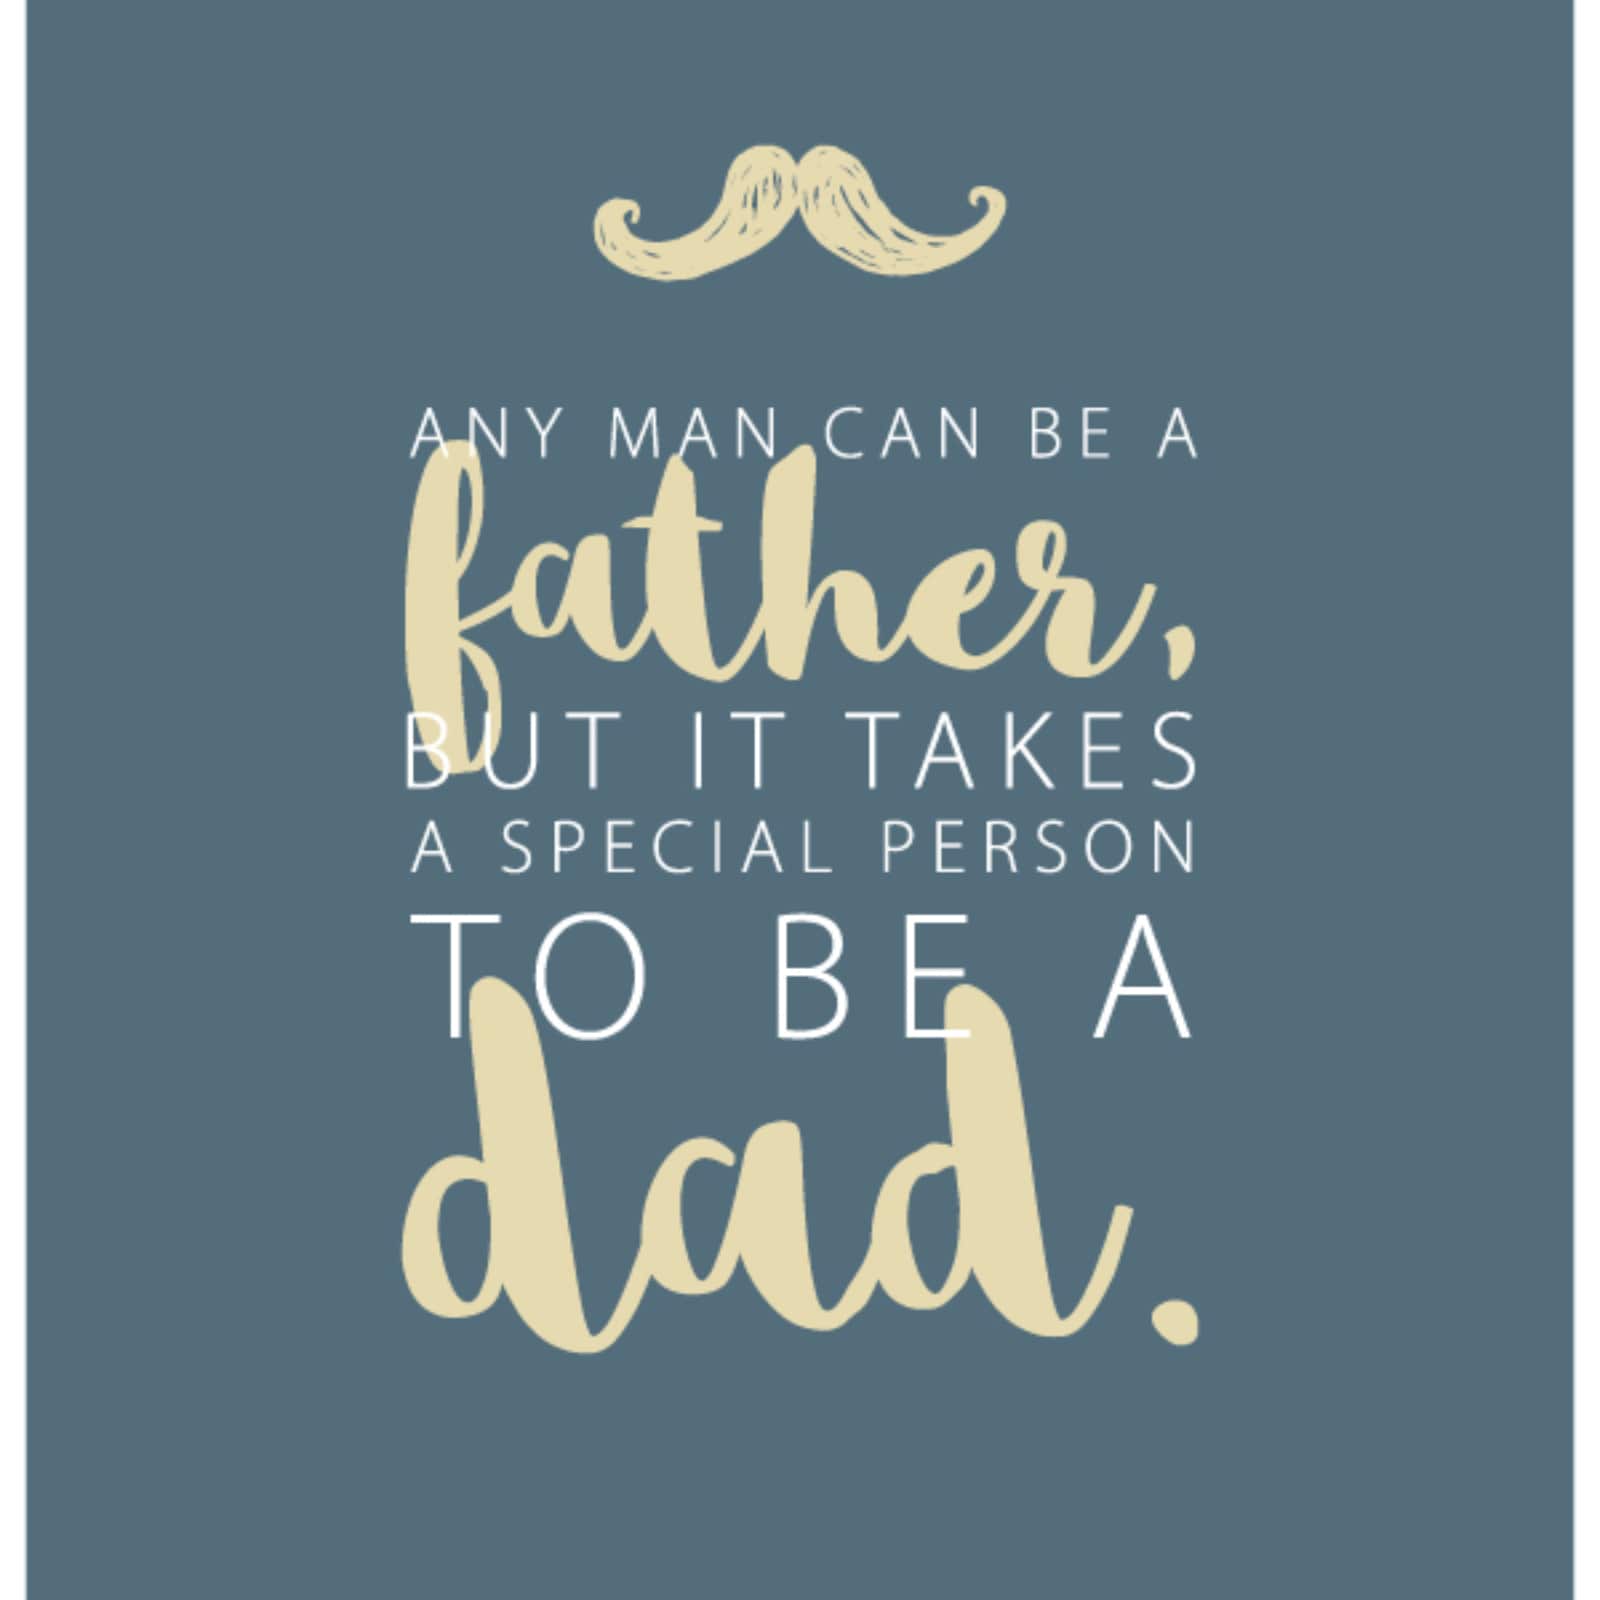 Happy Father’s Day 2022: Images, Wishes, Quotes, Messages and WhatsApp Greetings to Share. (Image: Shutterstock)